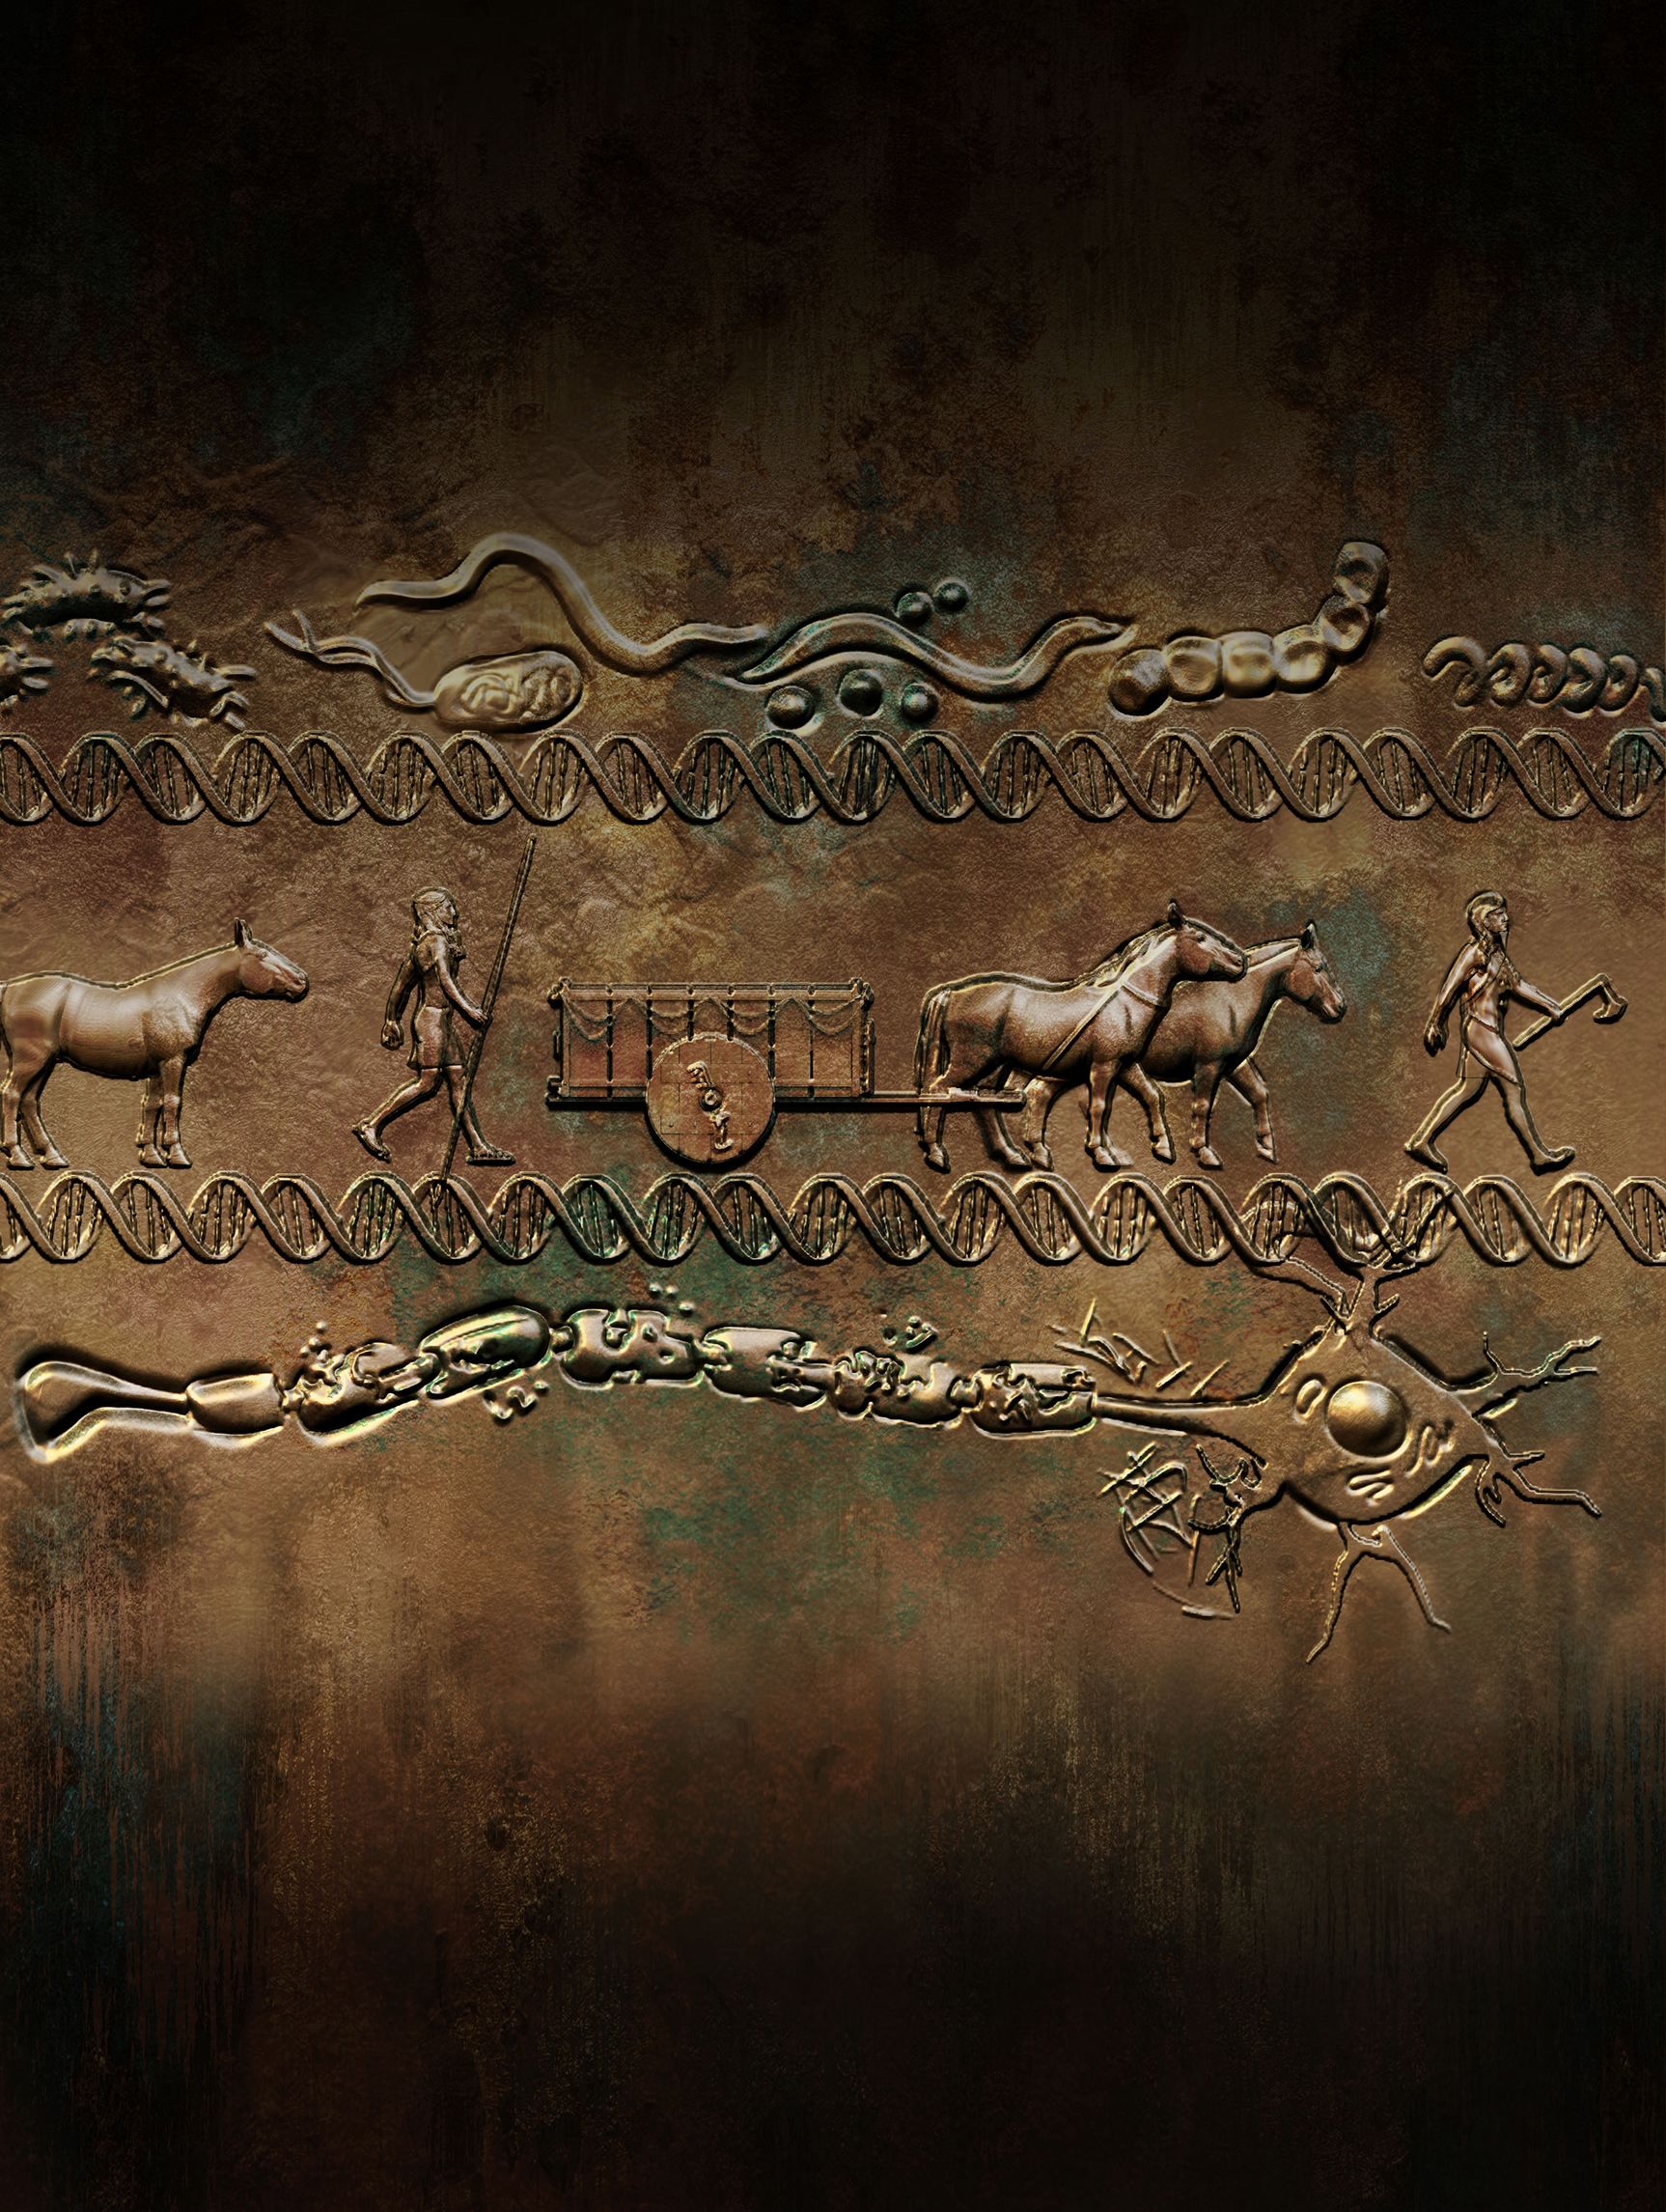 Yamnaya Bronze Relief. Evolution to cope with pathogen pressures in the Bronze Age impacts genetic risk for multiple sclerosis today. Credit SayoStudio.